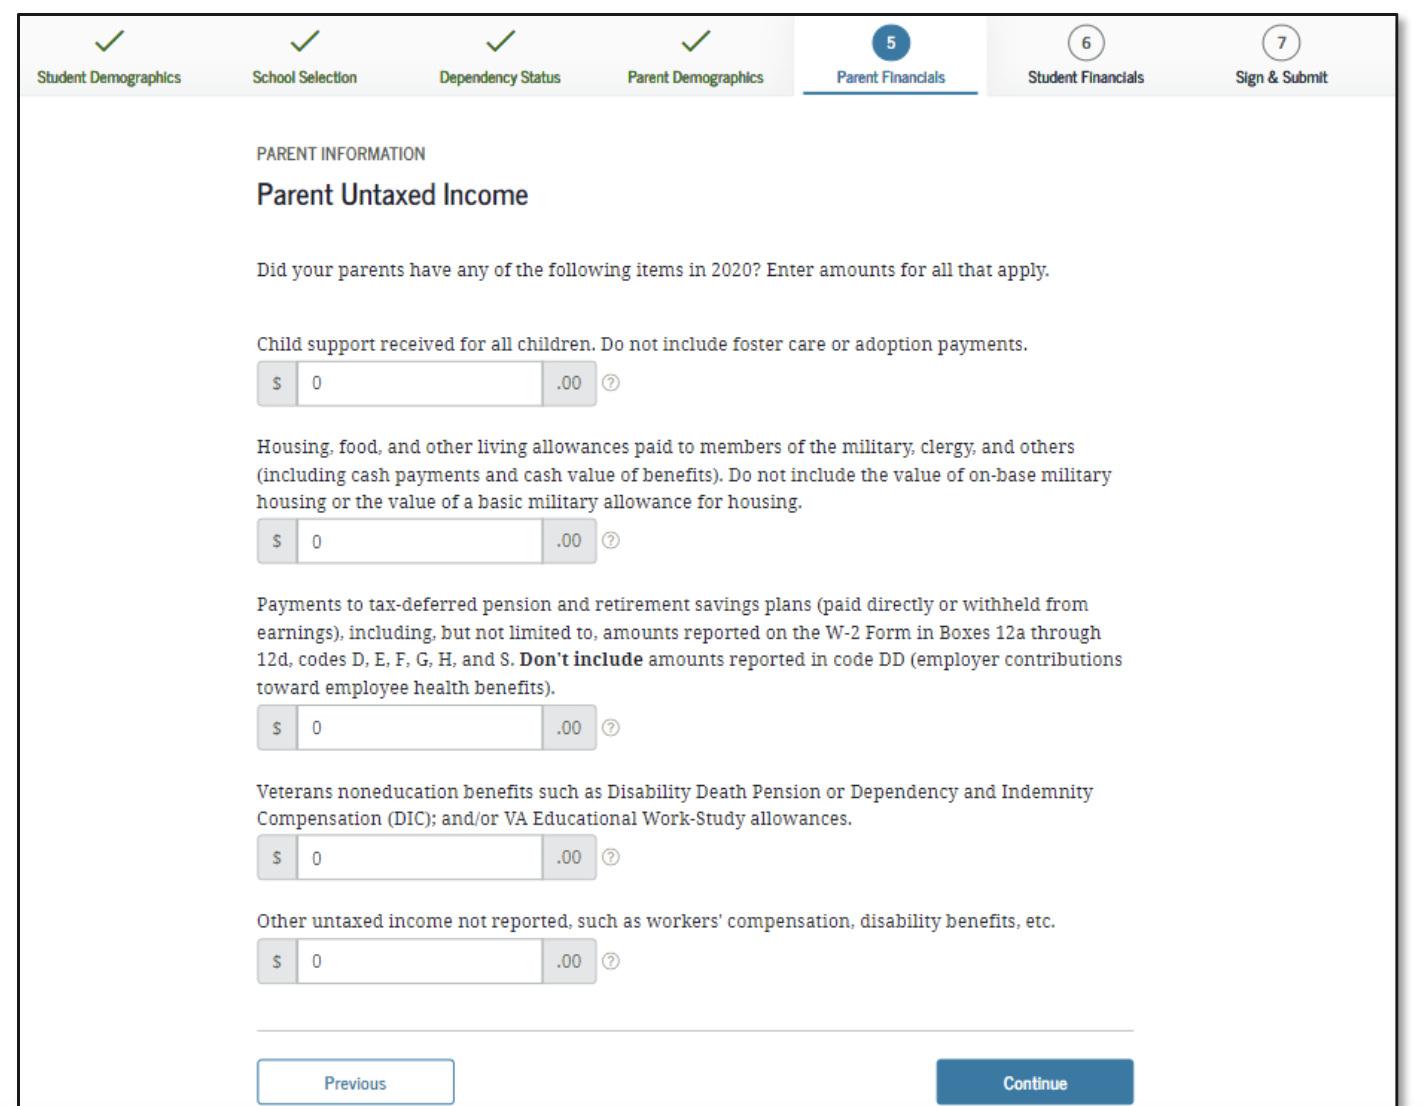 Parent Untaxed Income